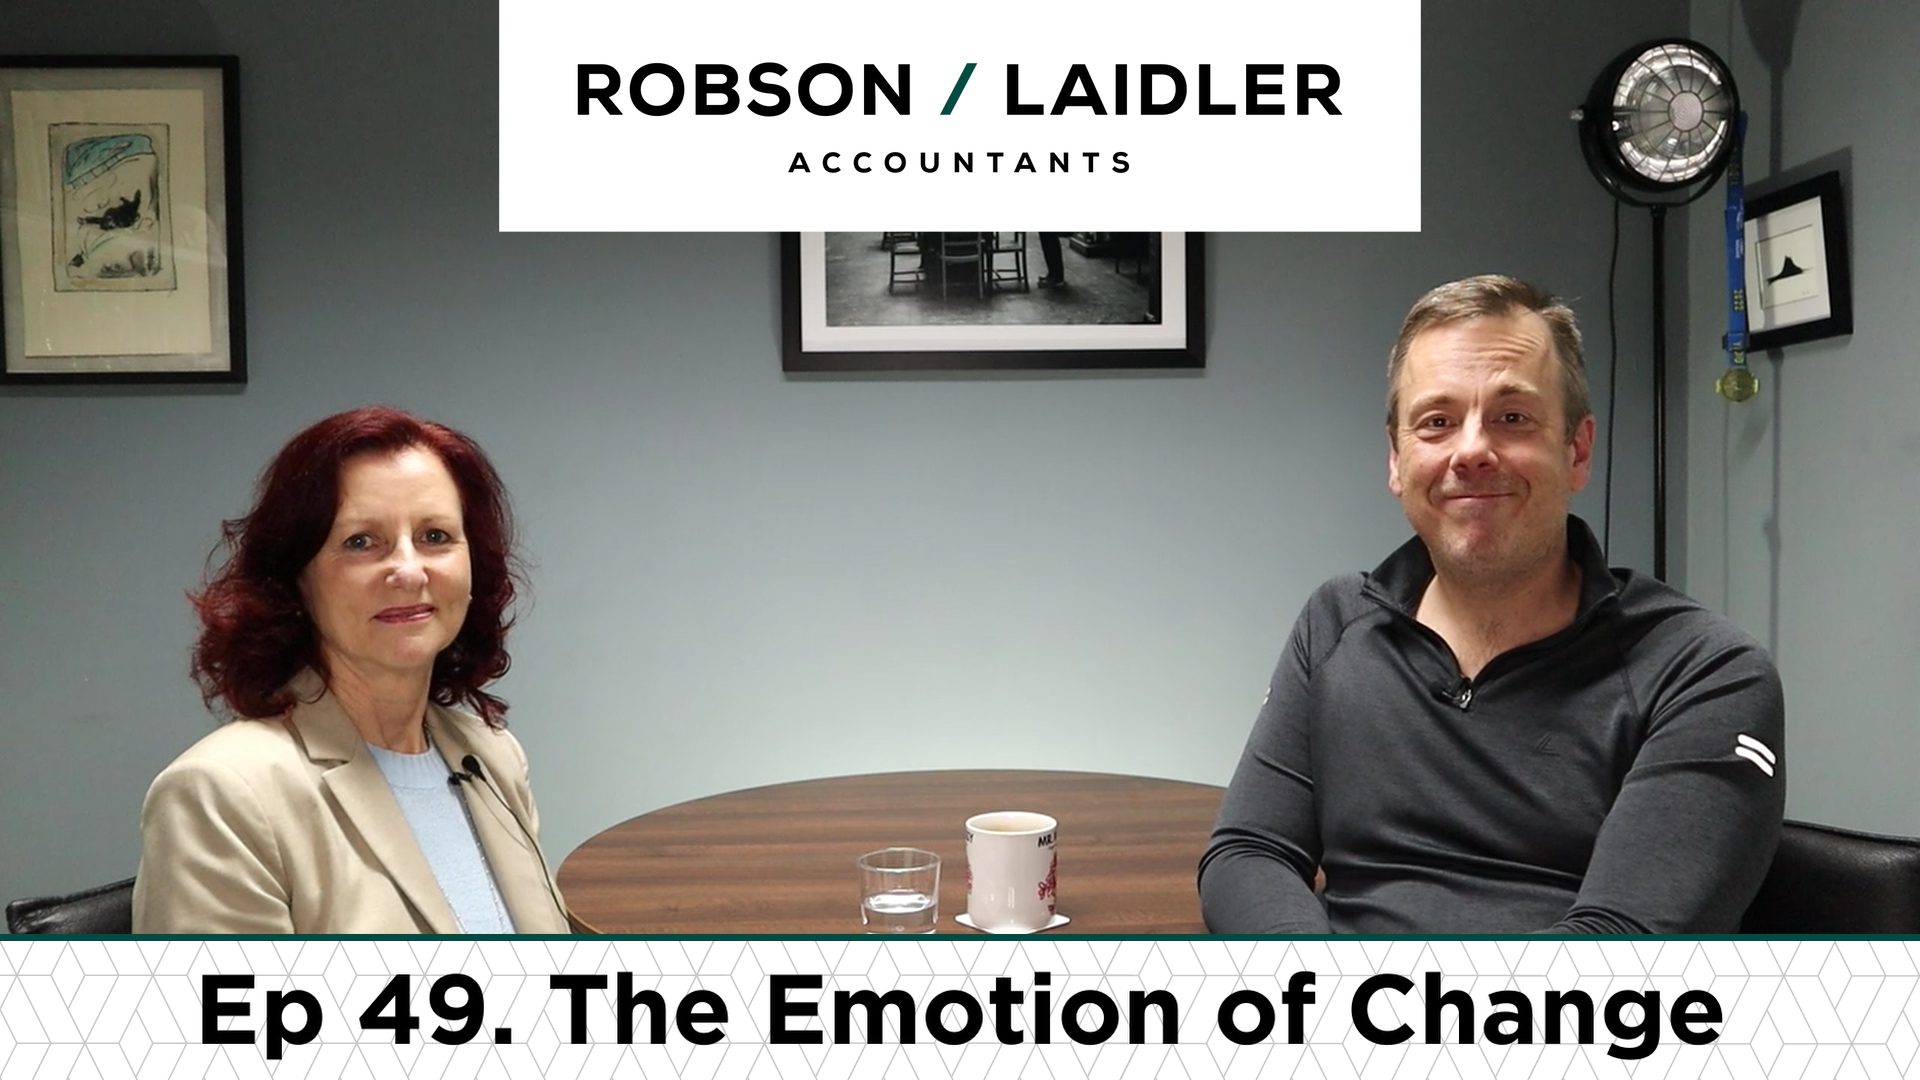 The emotion of change podcast